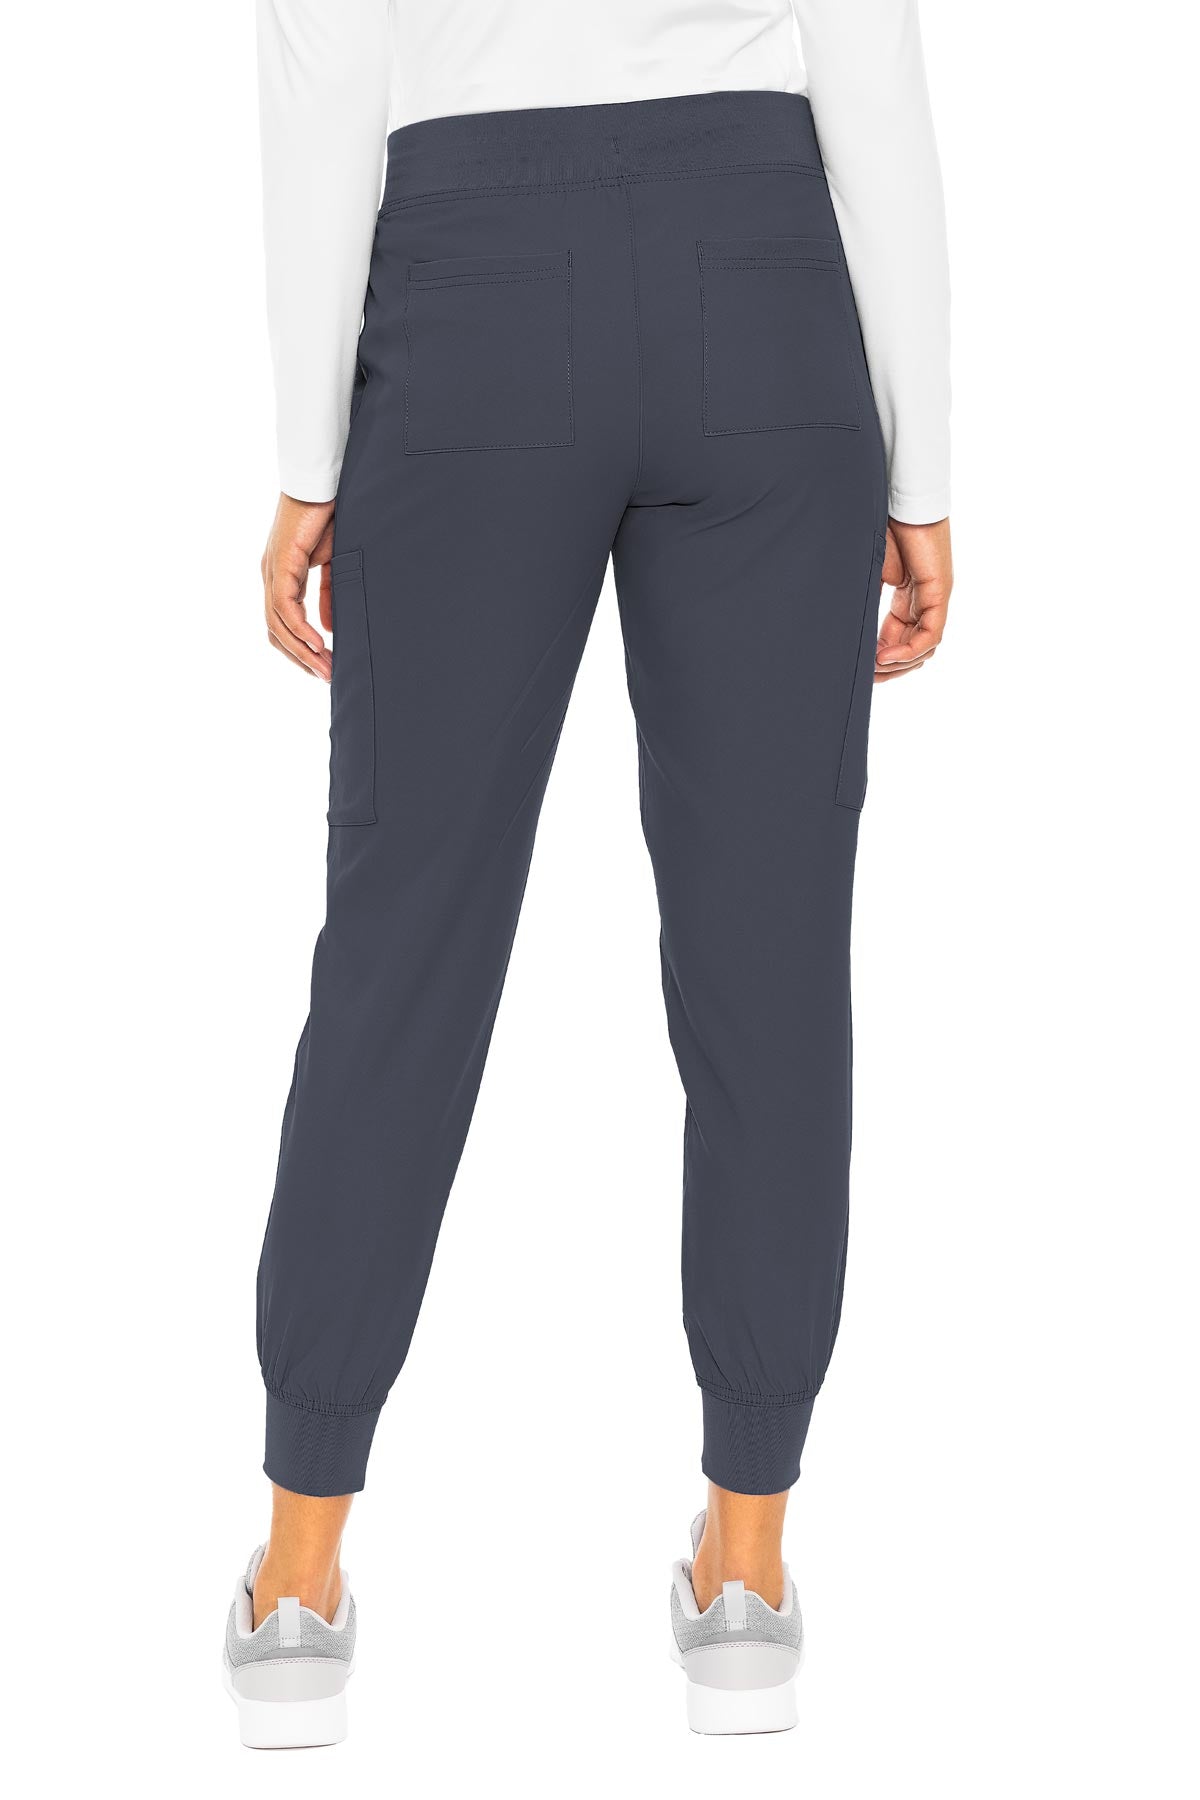 8721 Peaches Seamed Jogger Pant